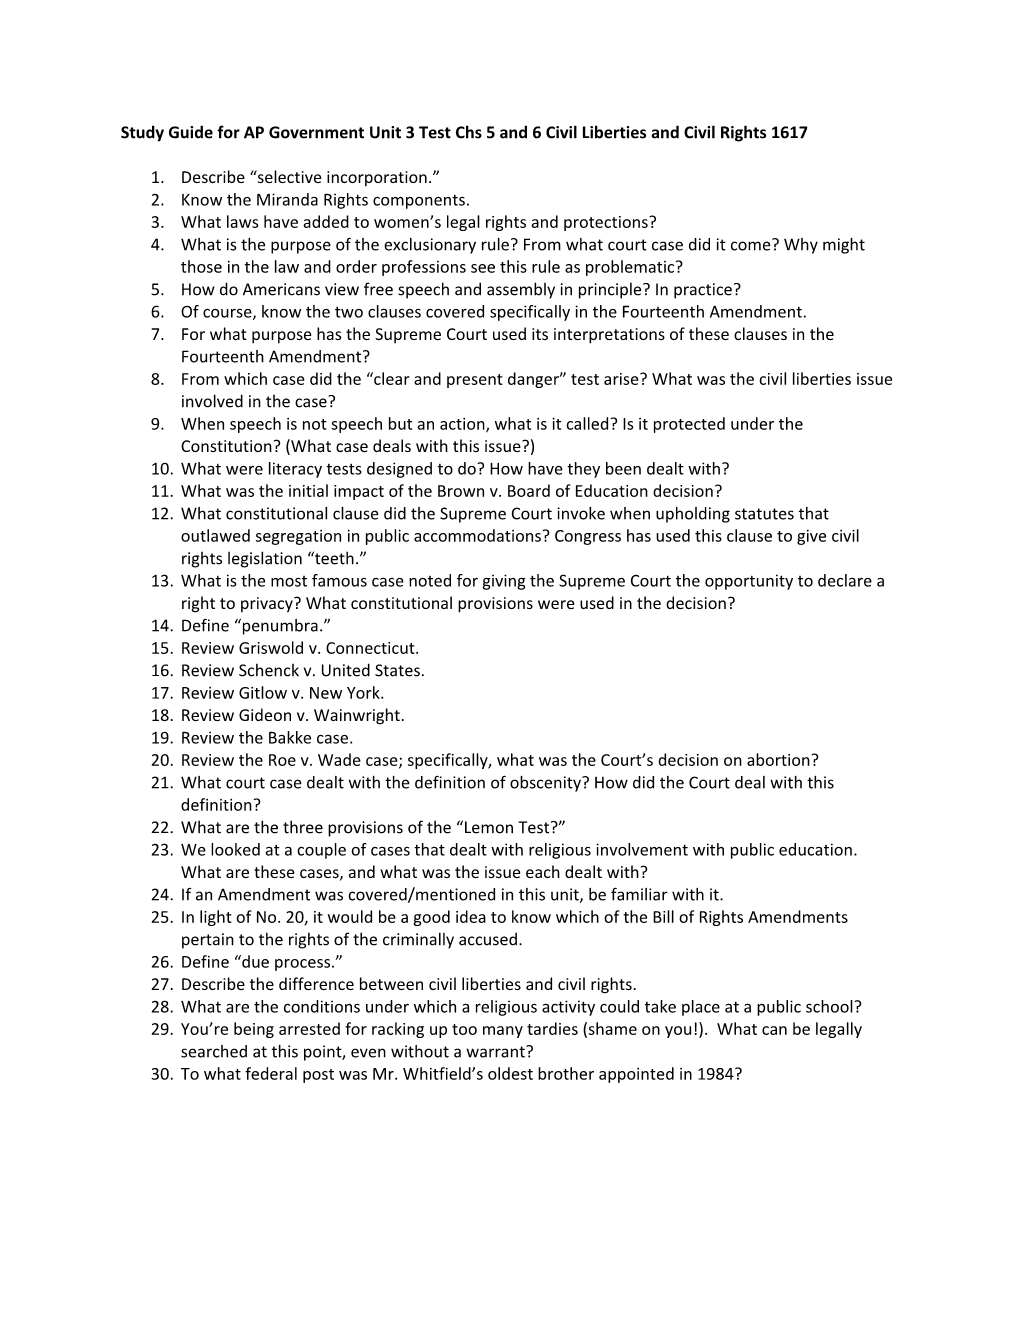 Study Guide for AP Government Unit 3 Test Chs 5 and 6 Civil Liberties and Civil Rights 1617